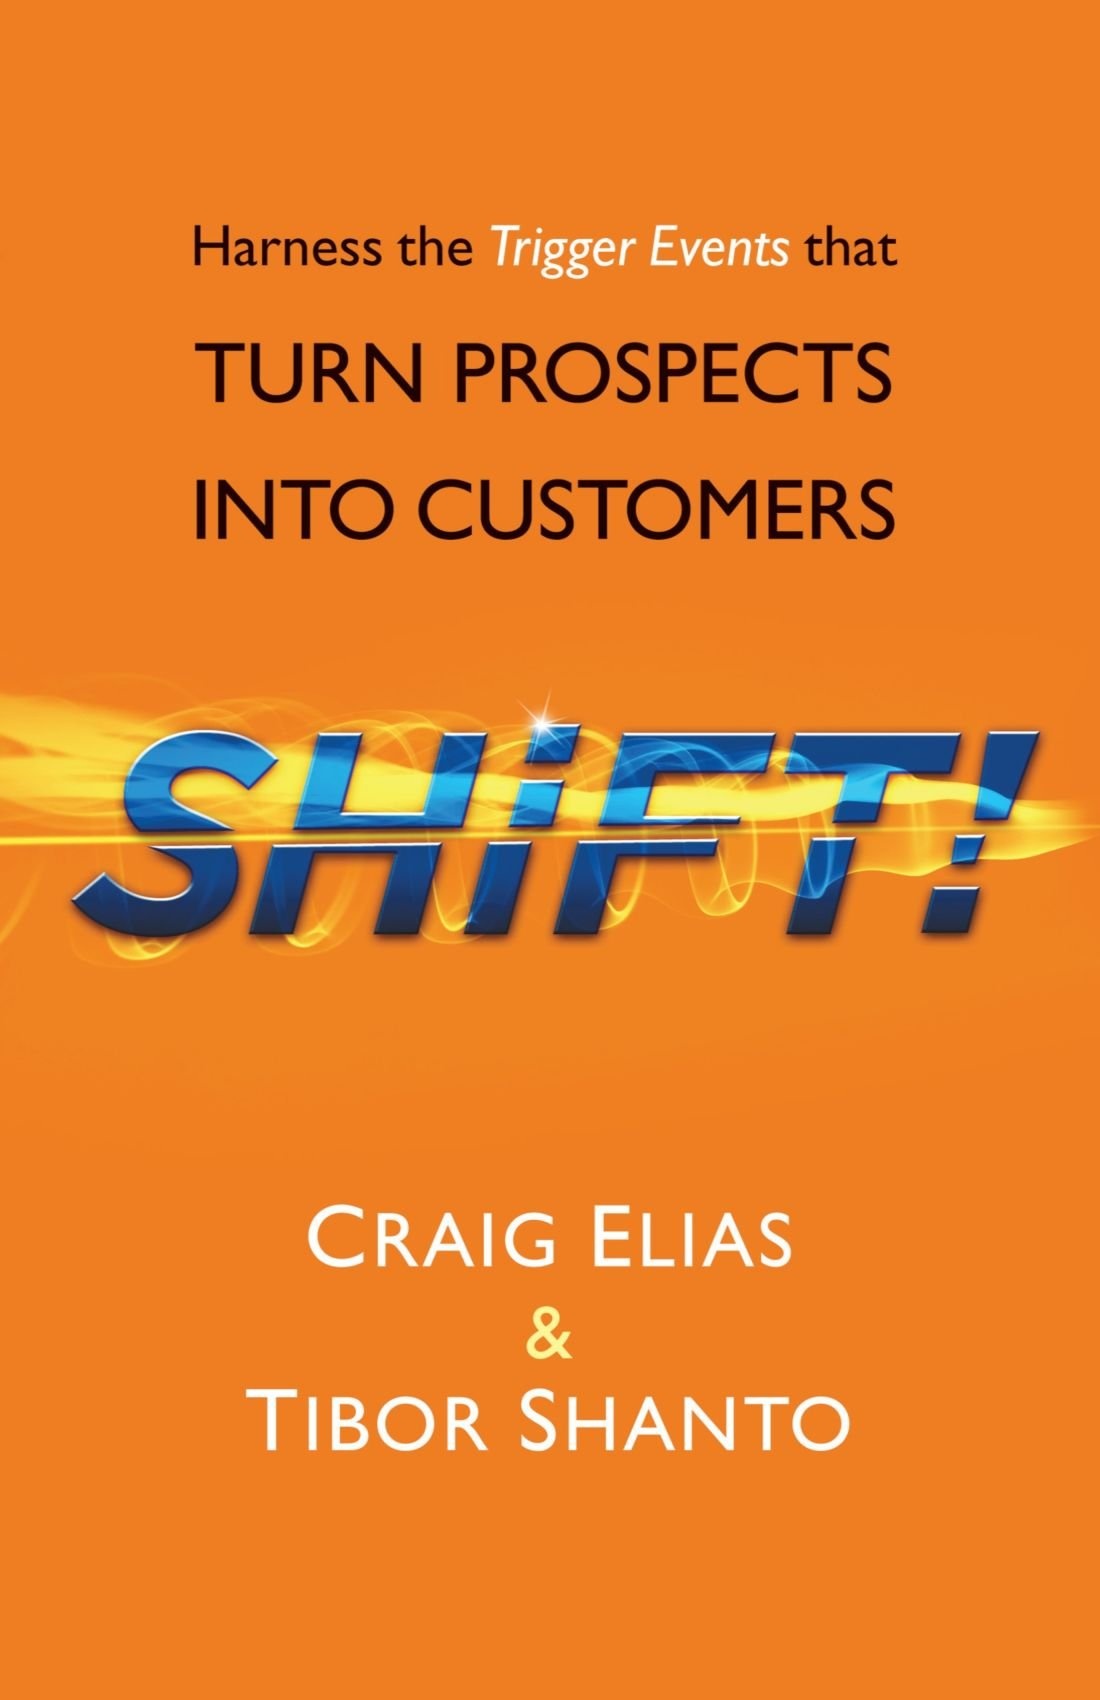 Shift! Harness the Trigger Events that Turn Prospects Into Customers  - Crag Elias and Tibor Shanto